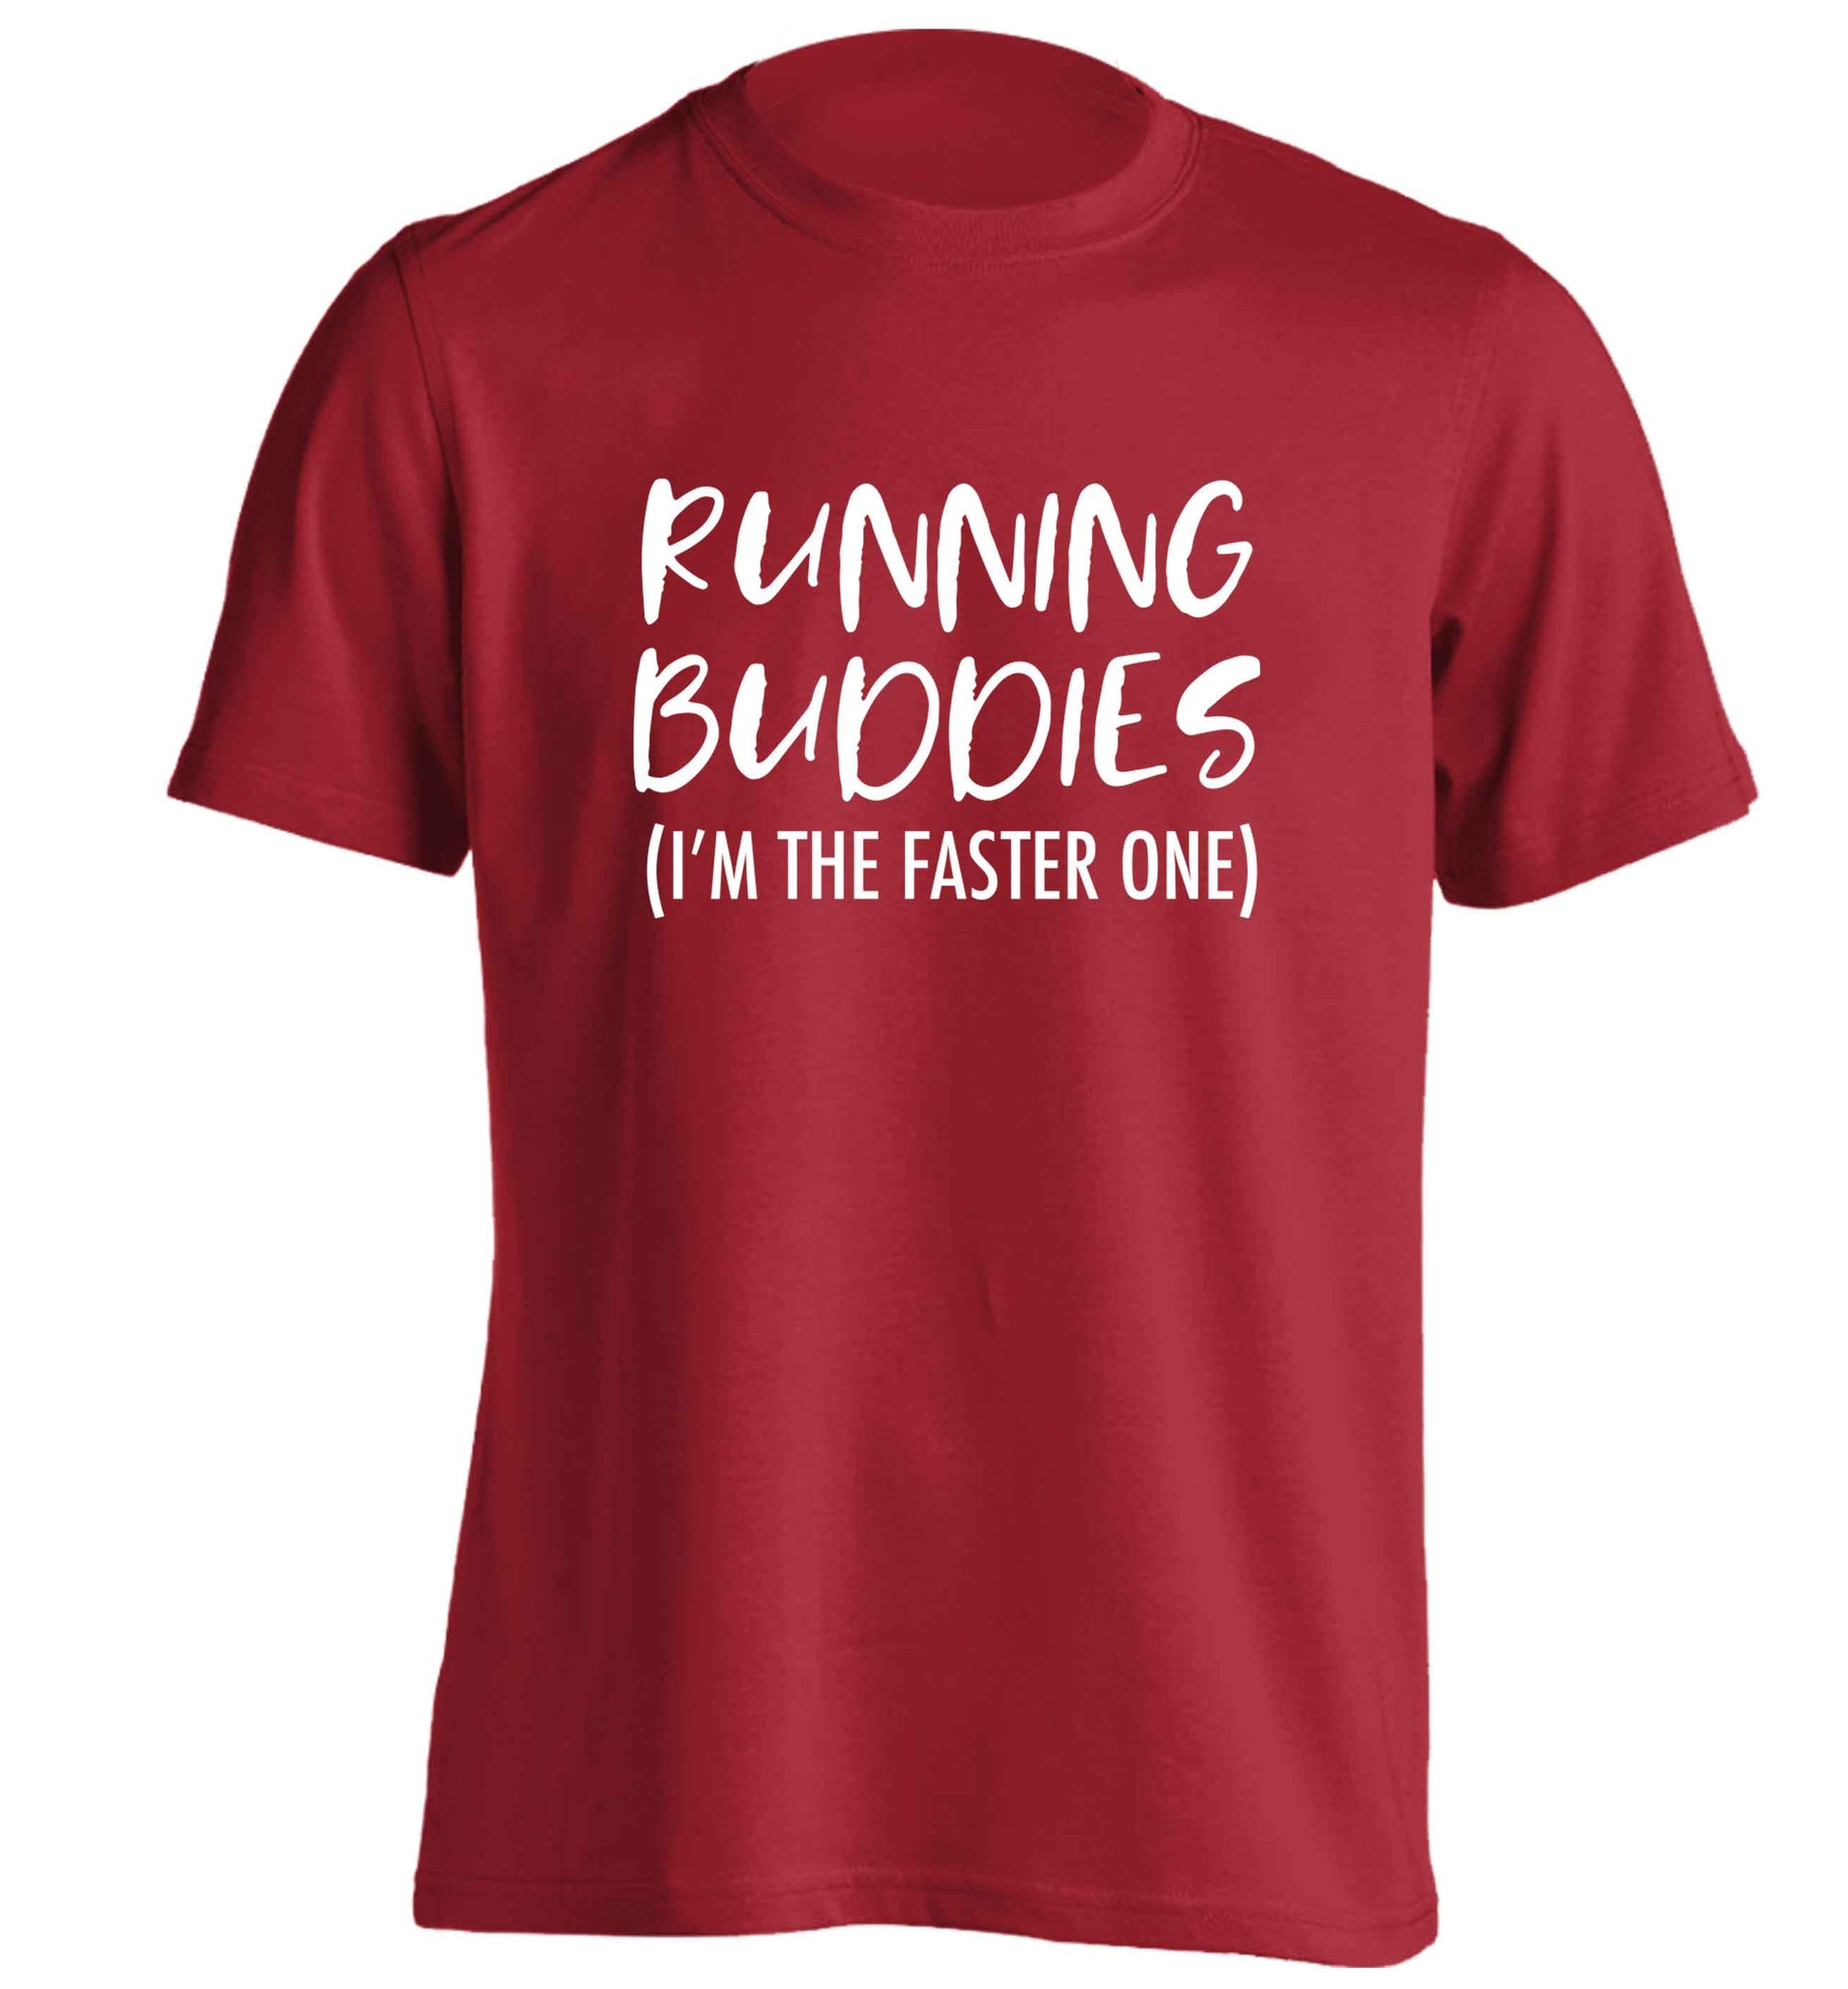 Running buddies (I'm the faster one) adults unisex red Tshirt 2XL